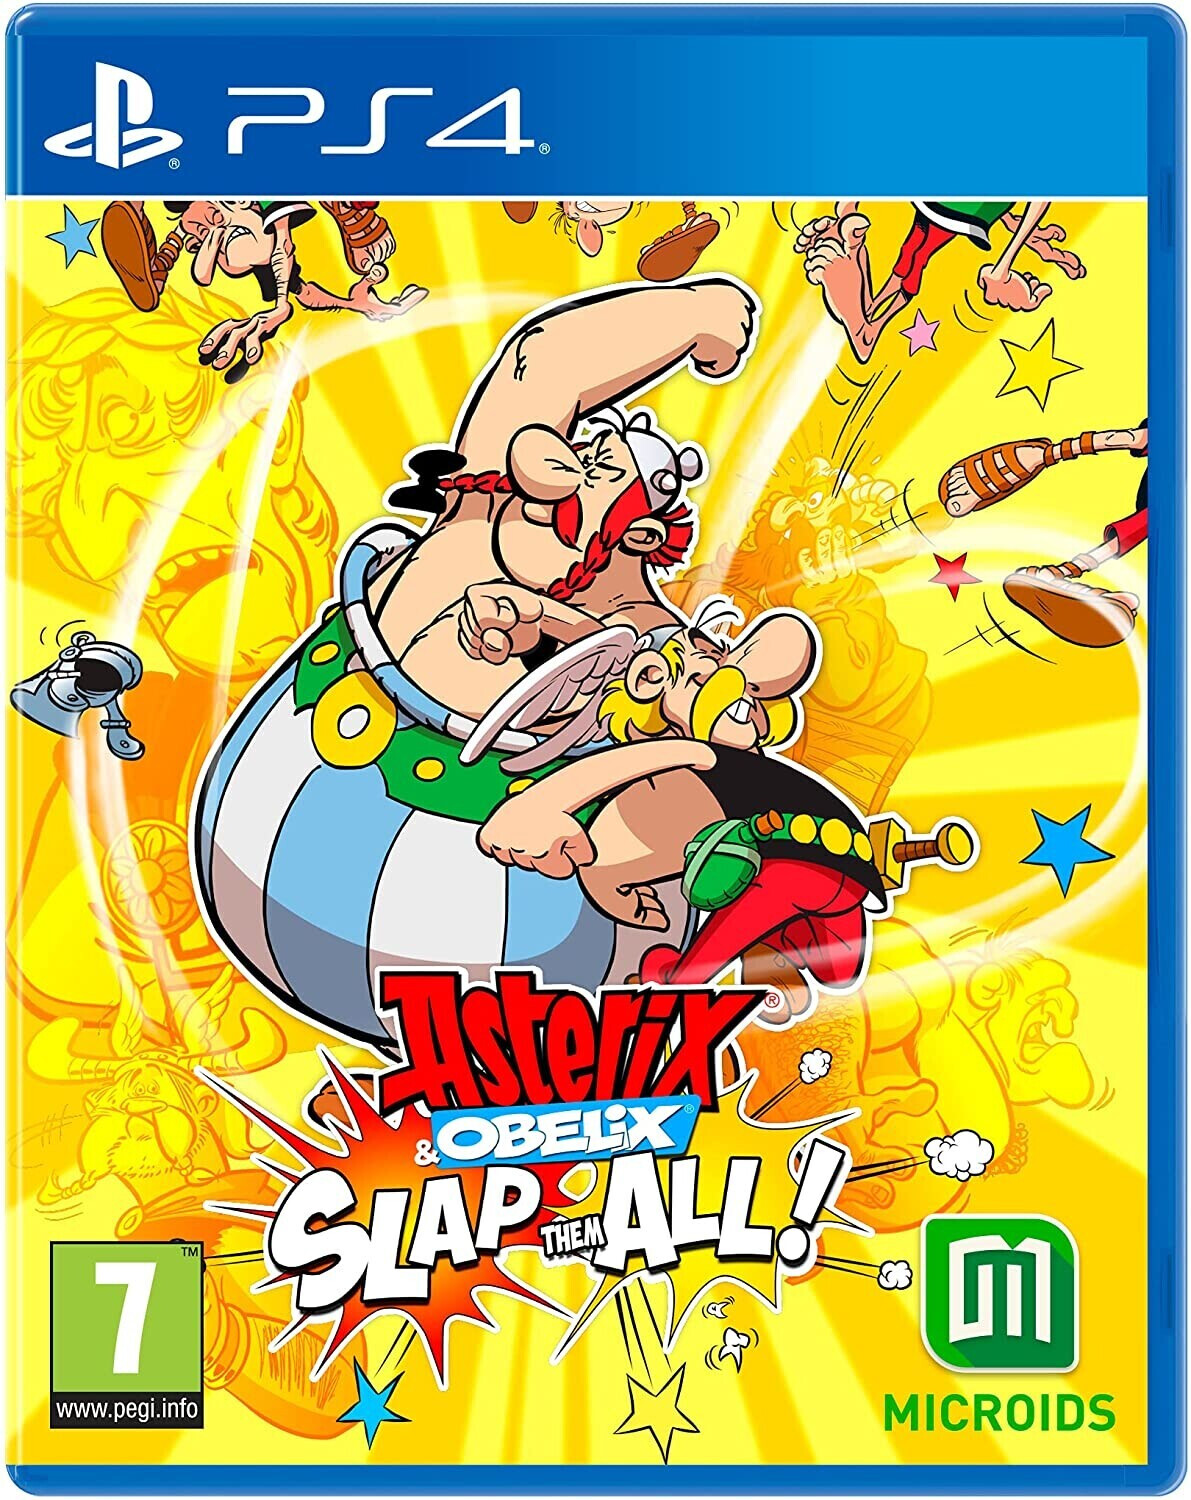 Photos - Game Microids Asterix & Obelix: Slap Them All! - Limited Edition (PS4)